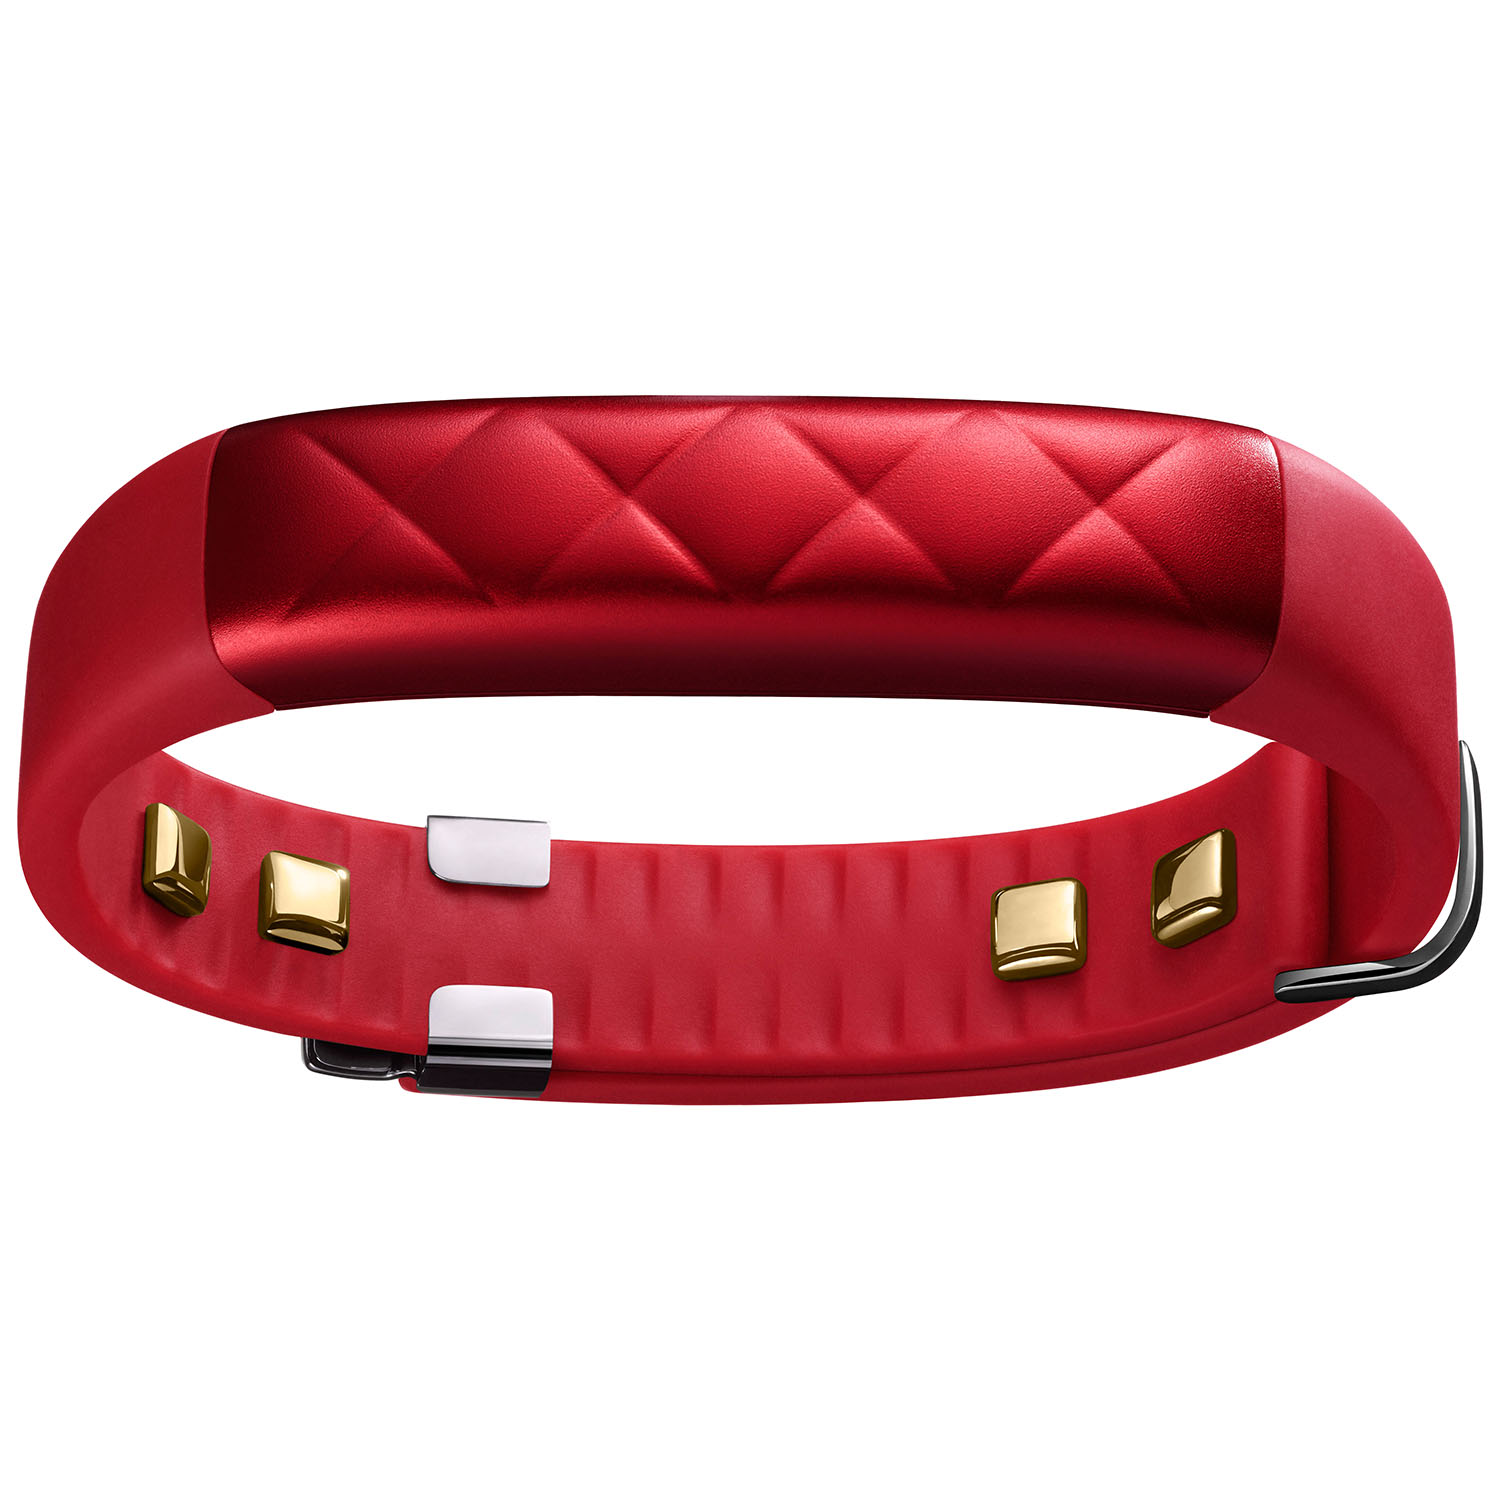 ï»¿Jawbone UP3 activity tracker and heart monitor for $28